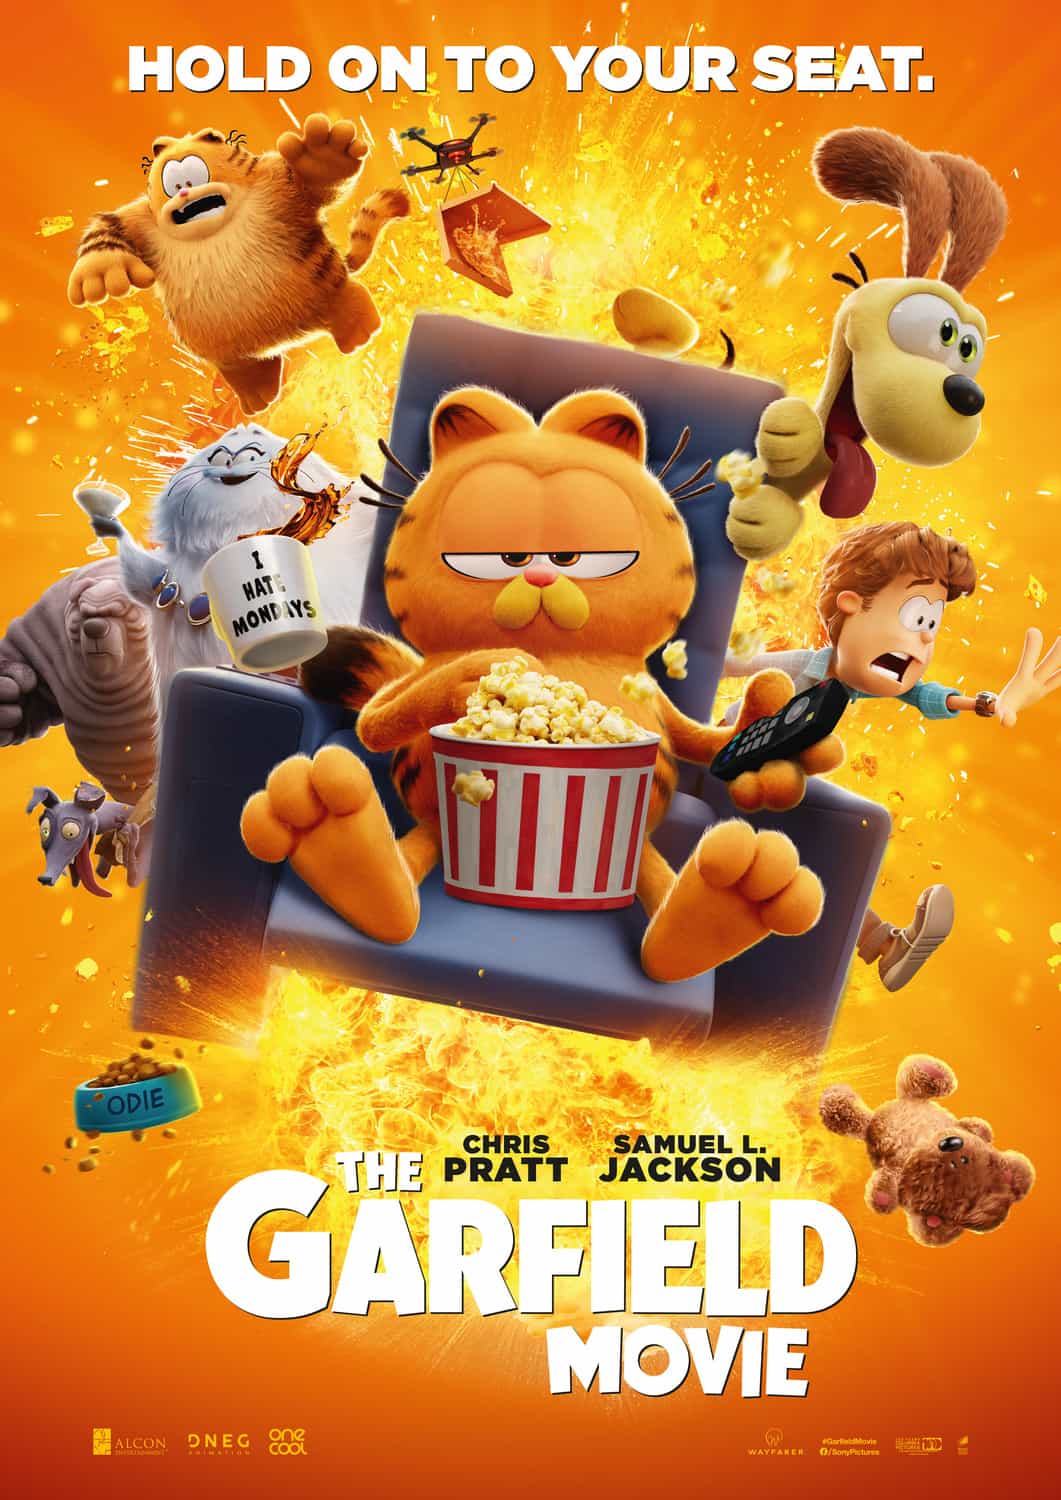 The Garfield Movie is given a U age rating in the UK for very mild threat, violence, language, rude humour